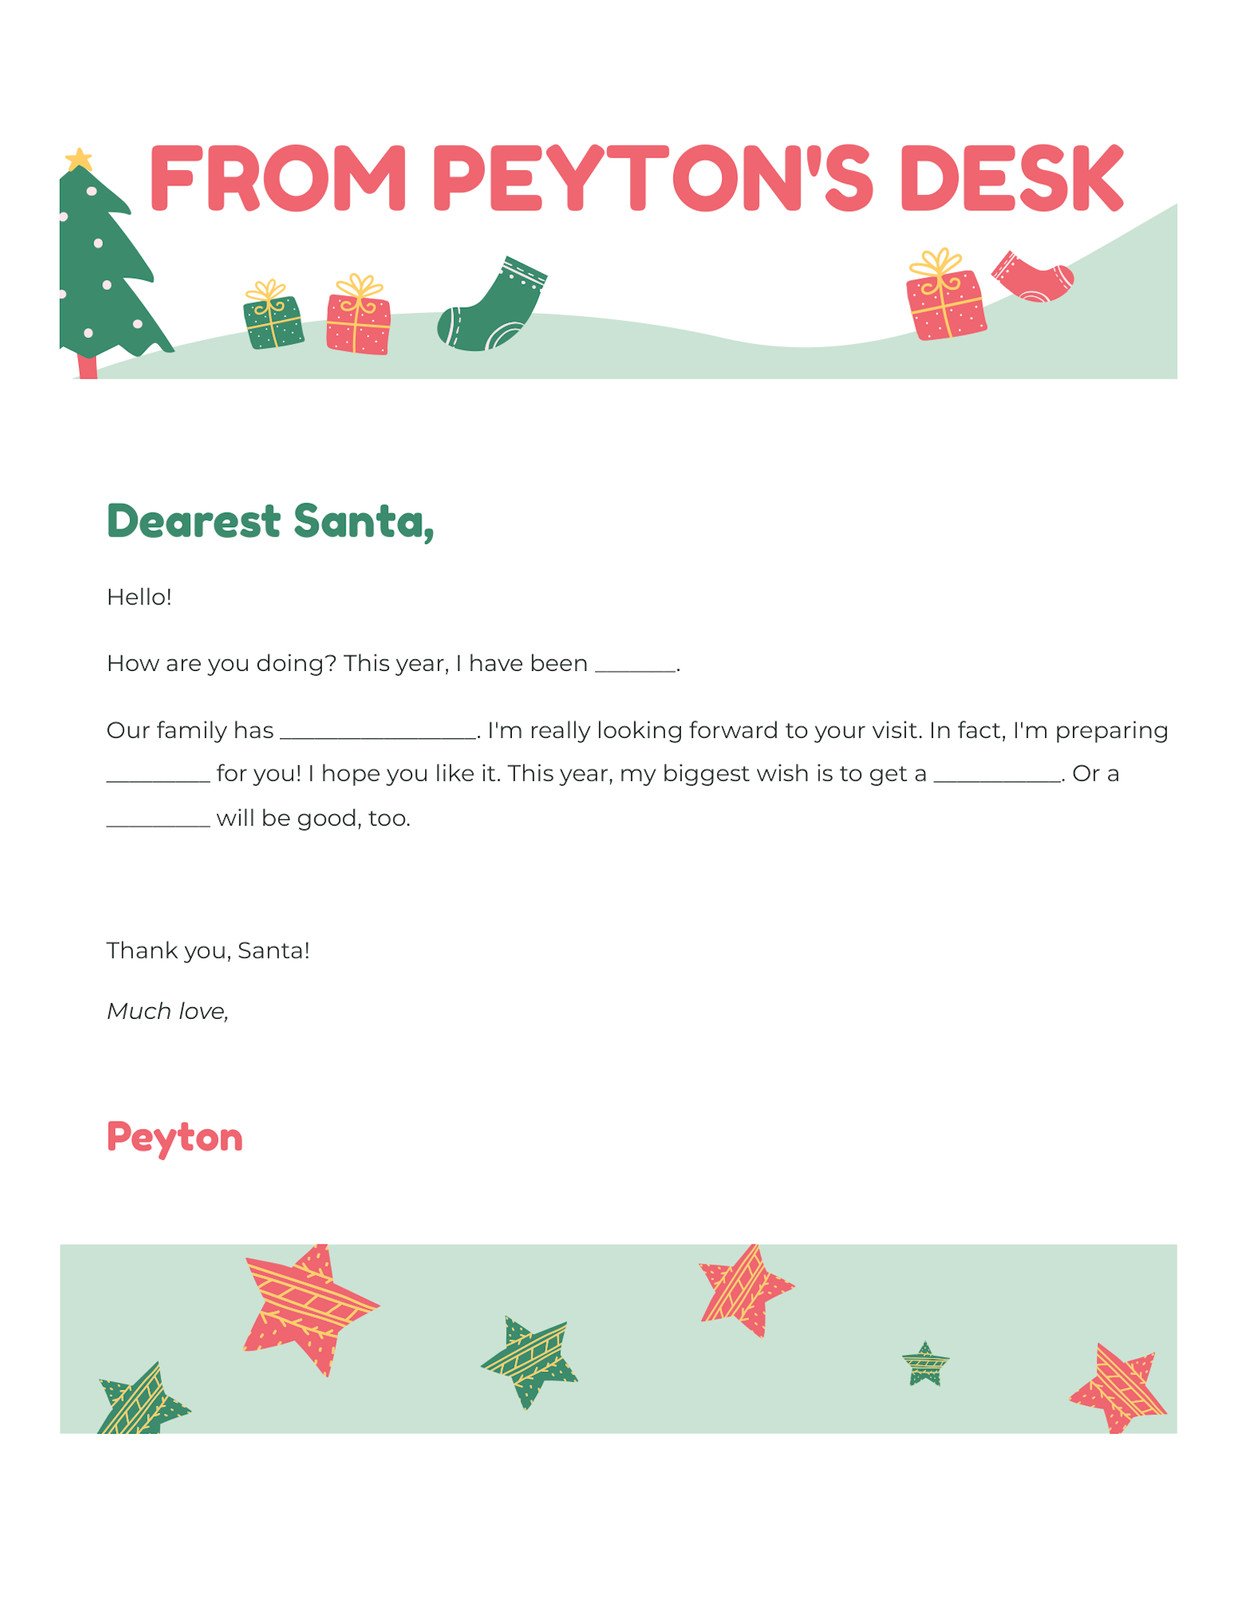 Christmas Letter Doc in Light Green Red Playful Illustrative Style